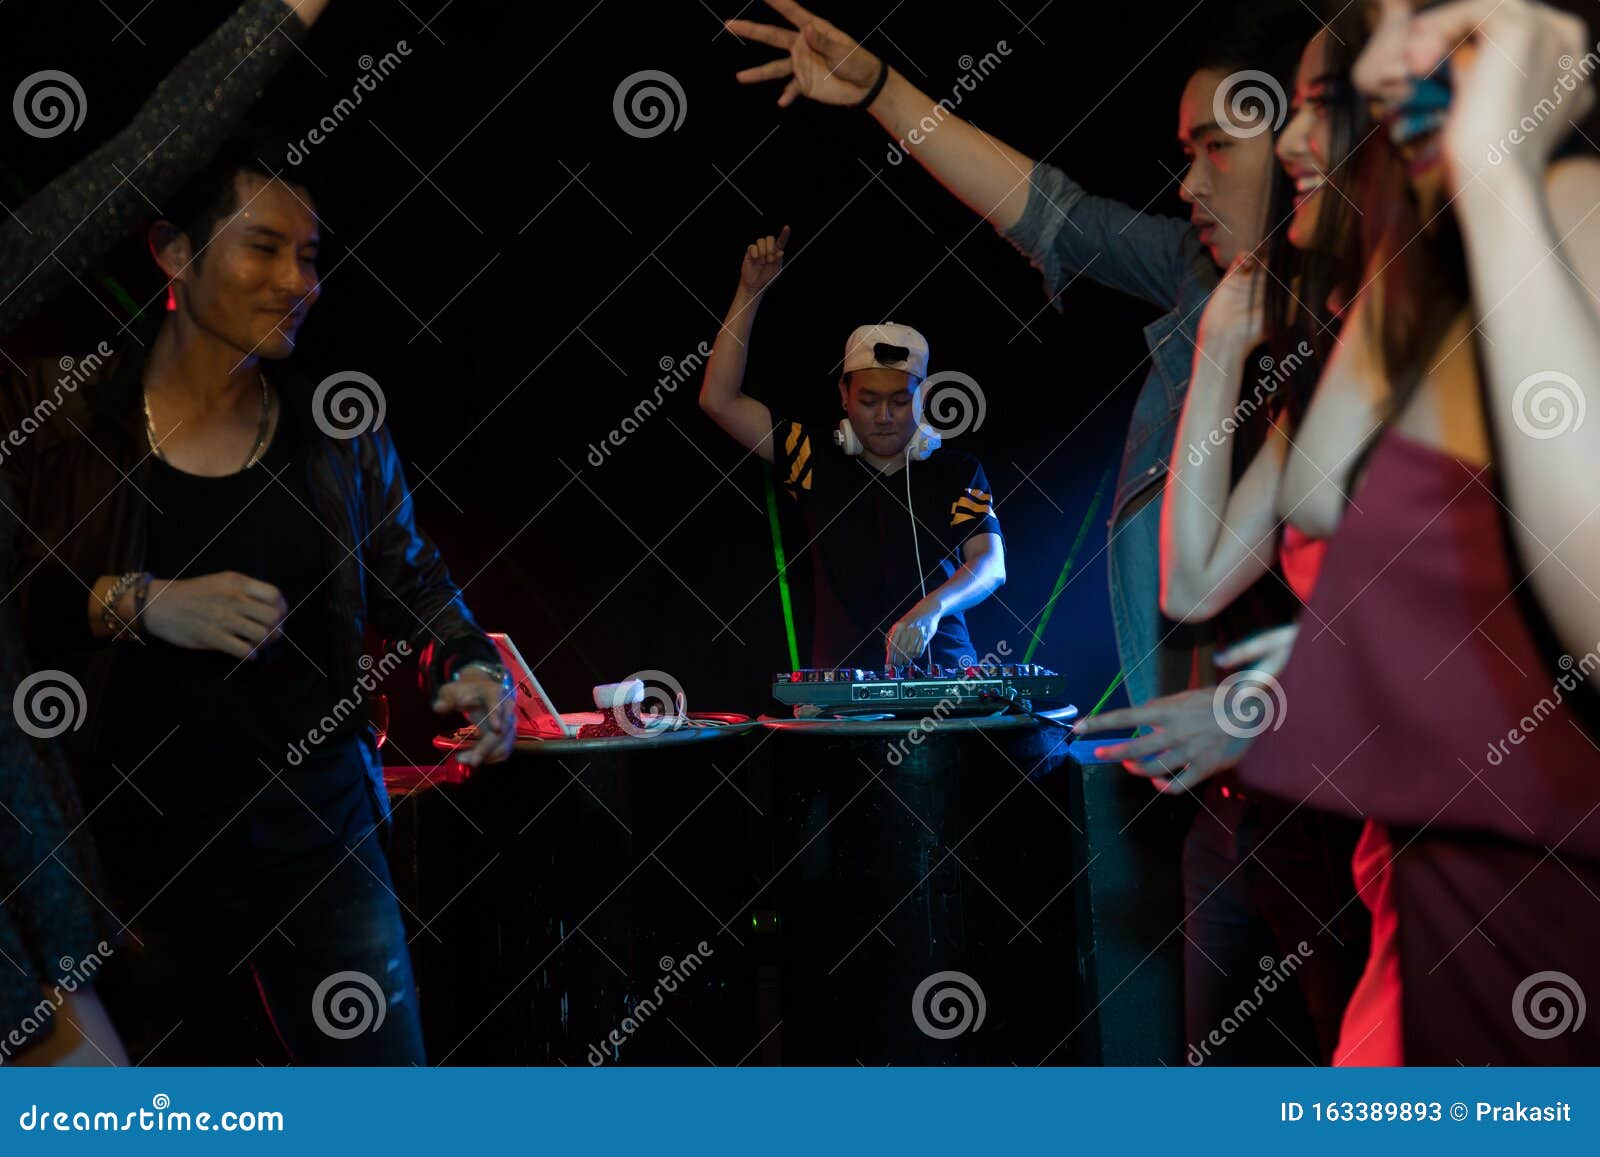 Party Young People Group Dancing Stock Image - Image of dancing, club ...